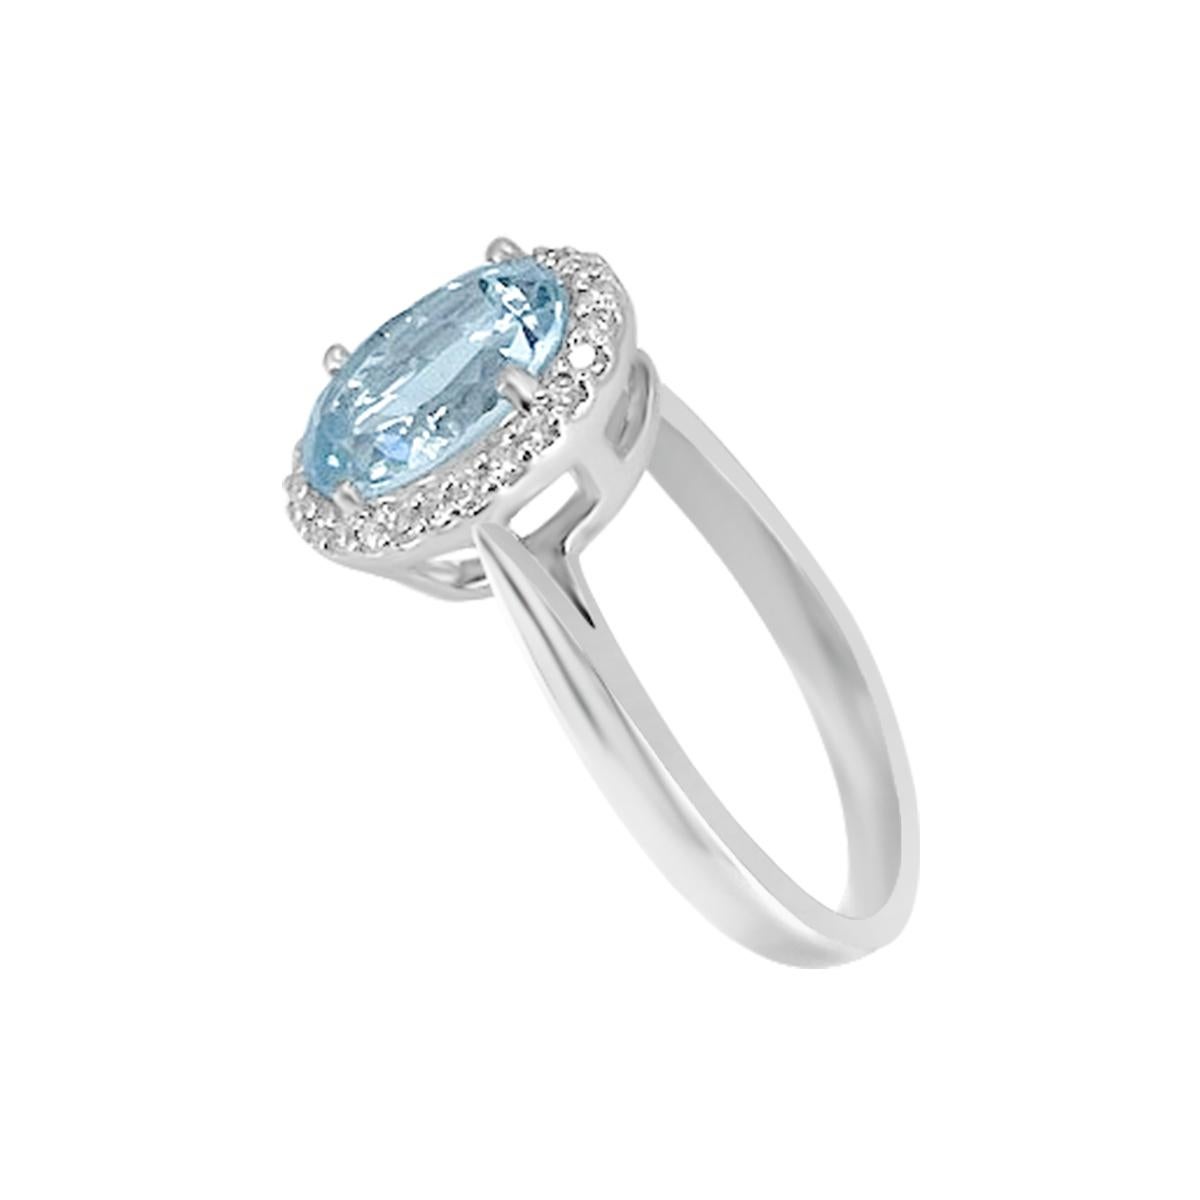 Modern 14K White Gold 1.74cts Aquamarine and Diamond Ring, Style# TS1030AQR For Sale